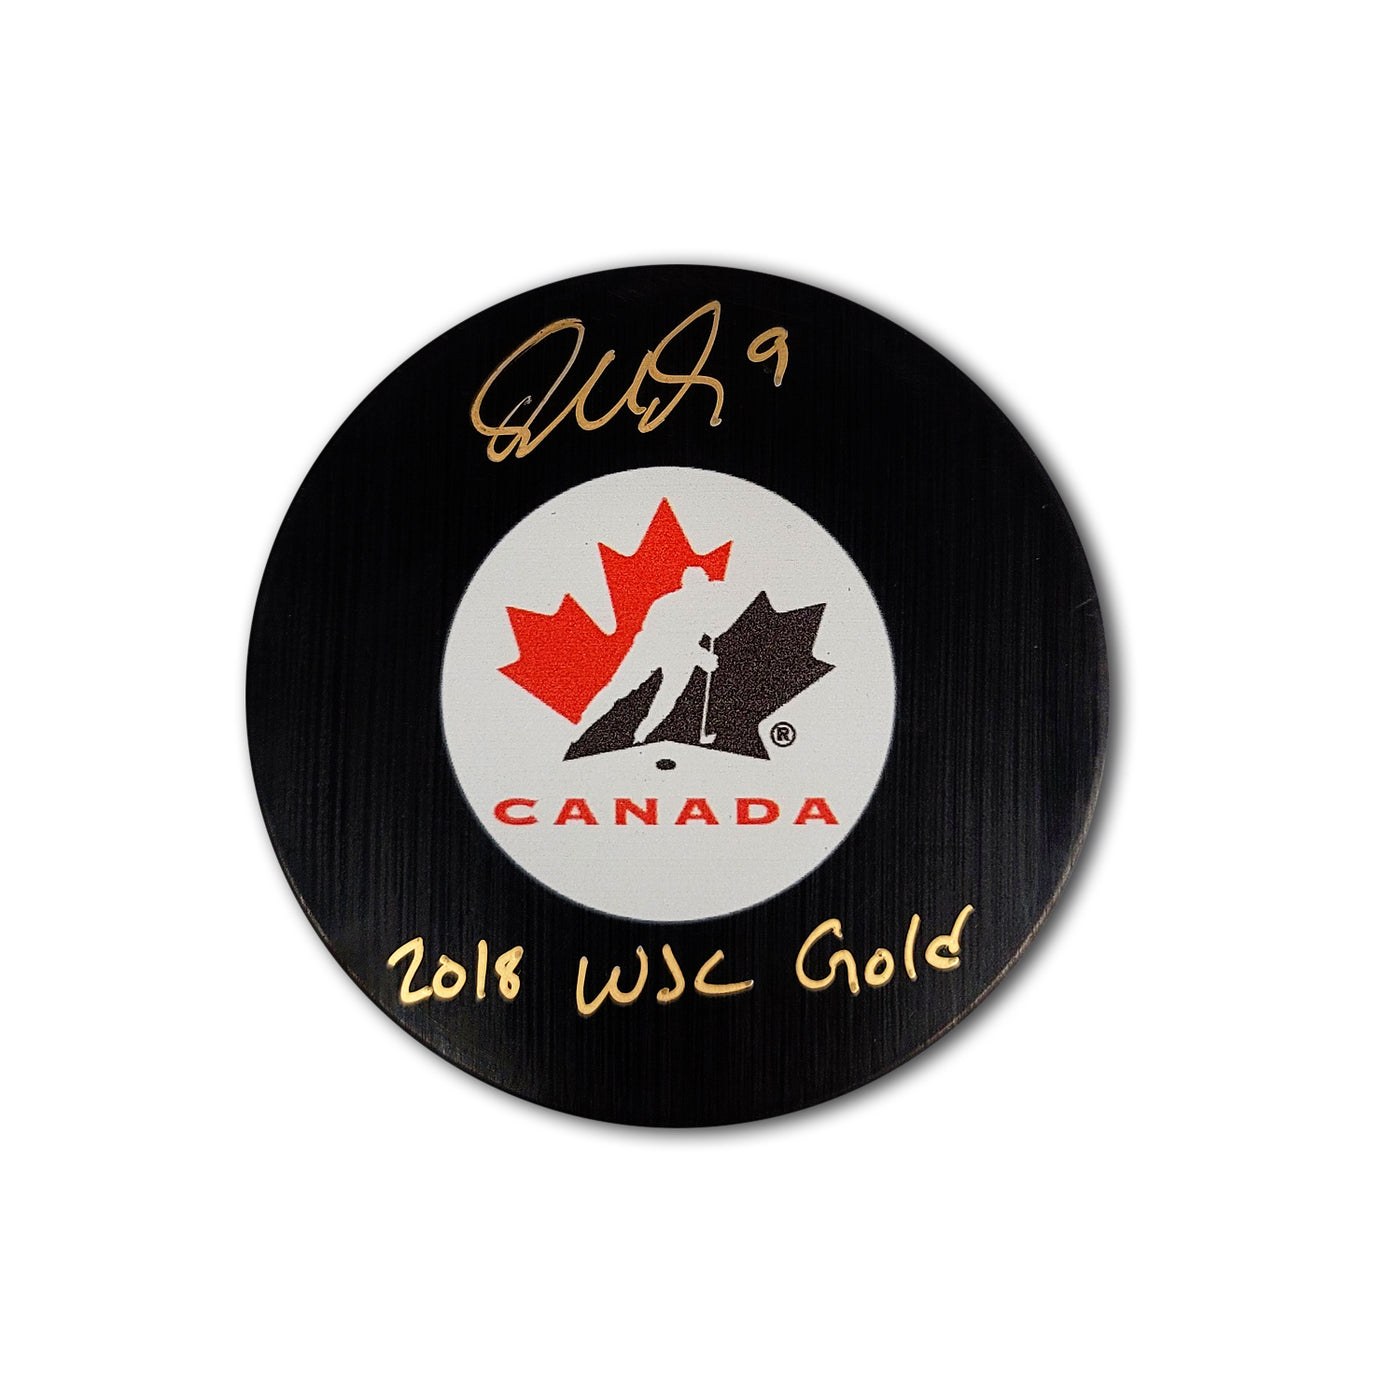 Dillon Dube Team Canada Autographed Hockey Puck Inscribed 2018 WJC Gold